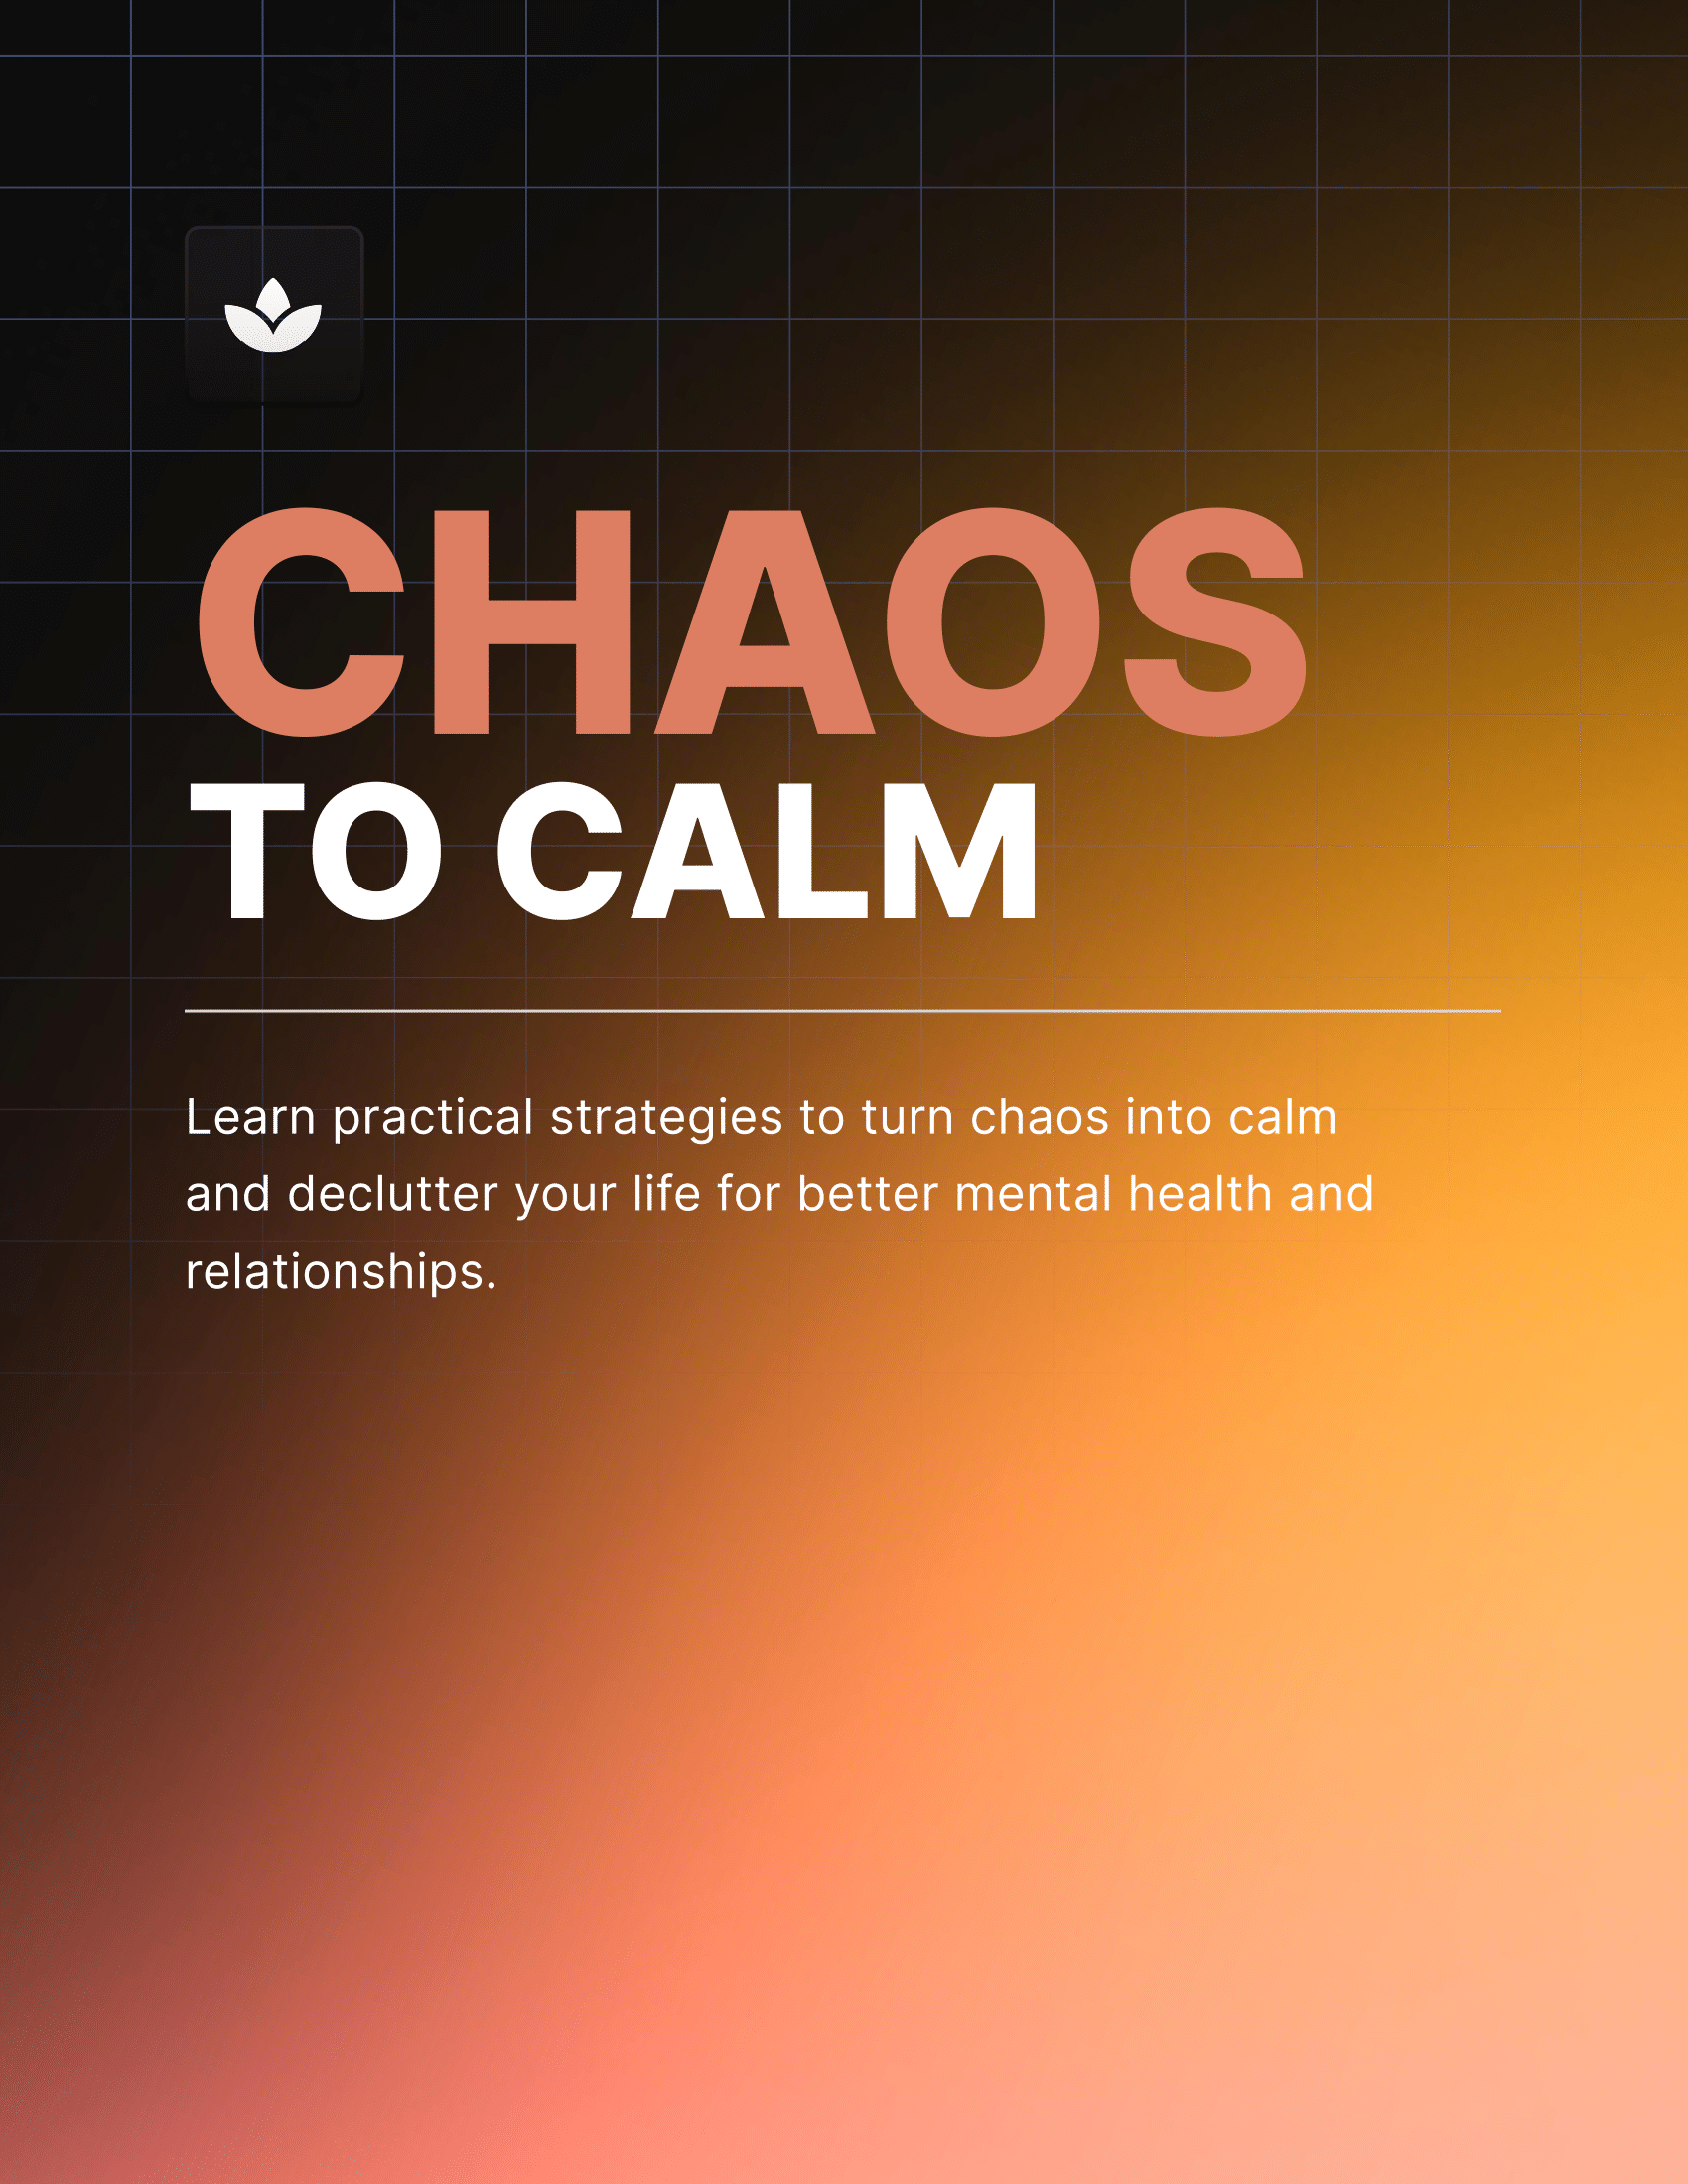 Chaos to Calm: A Guide to Finding Serenity in Turbulent Times